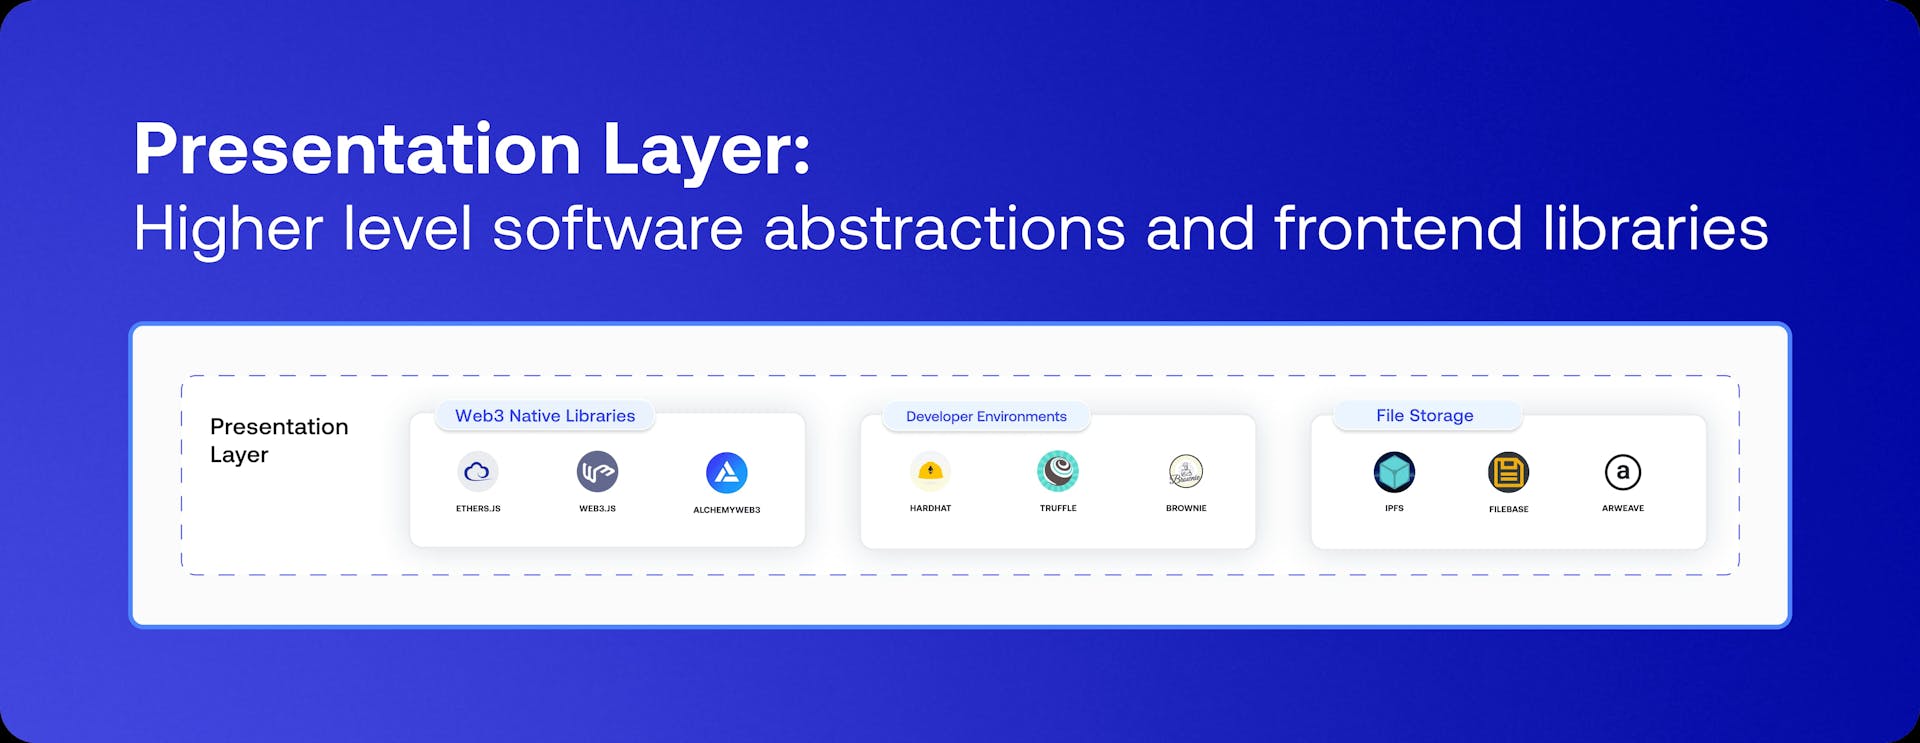 Presentation Layer: Higher level software abstractions and frontend libraries